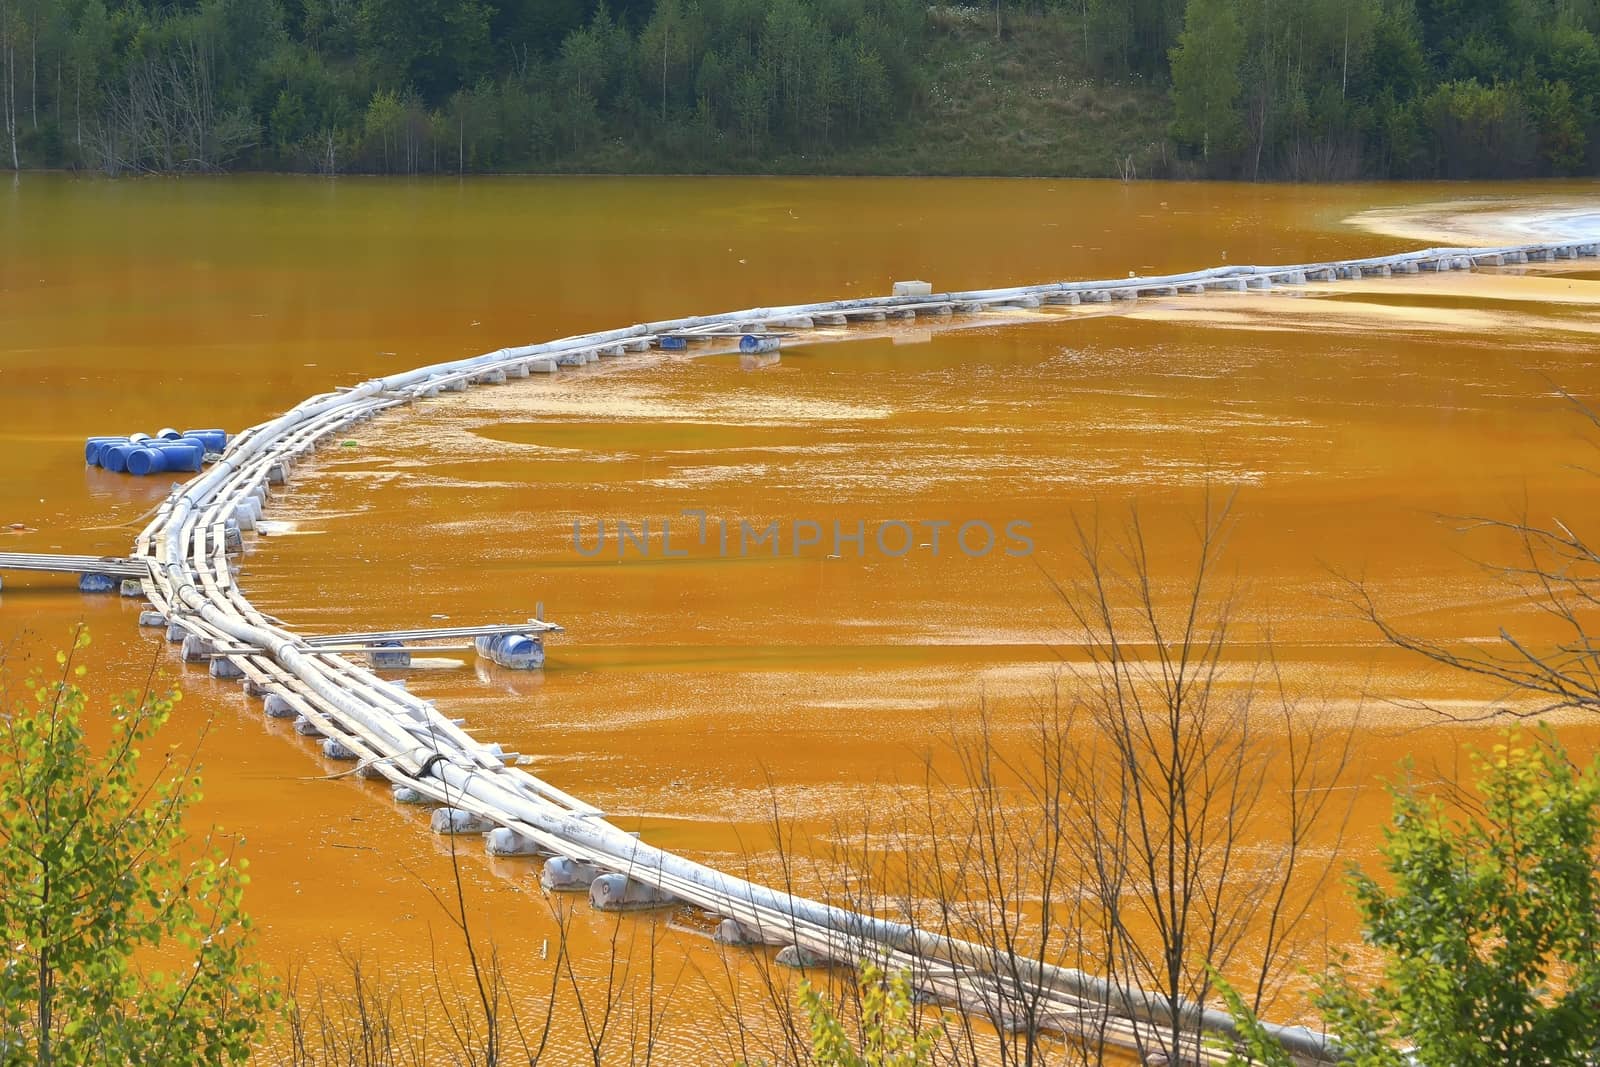 Red lake polluted with dead trees and a flooded church in Romania, Geamana by comet